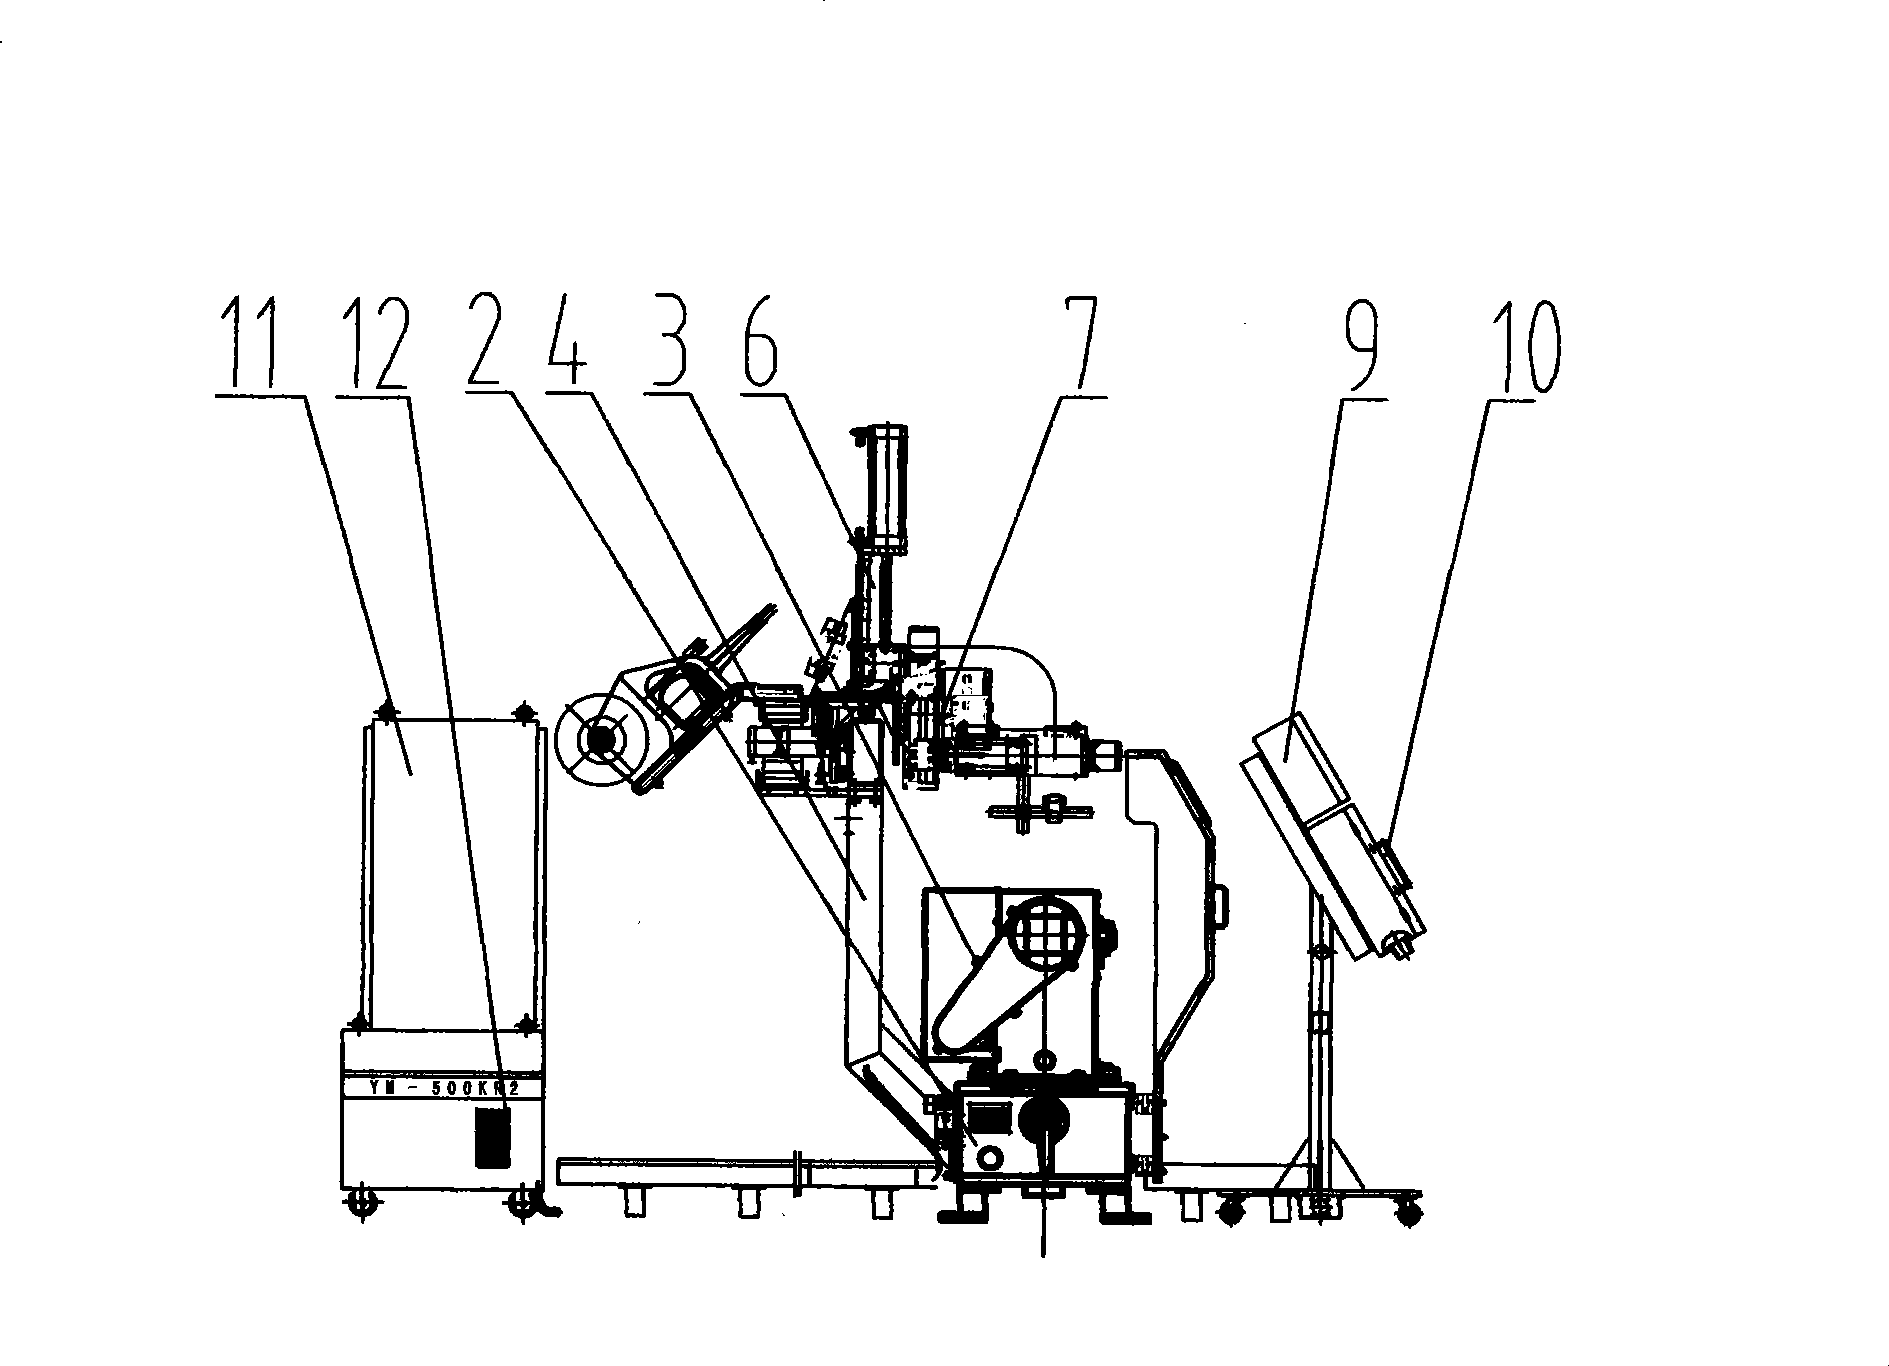 Welding device and technique of axle housing assembly Y-shaped weld joint